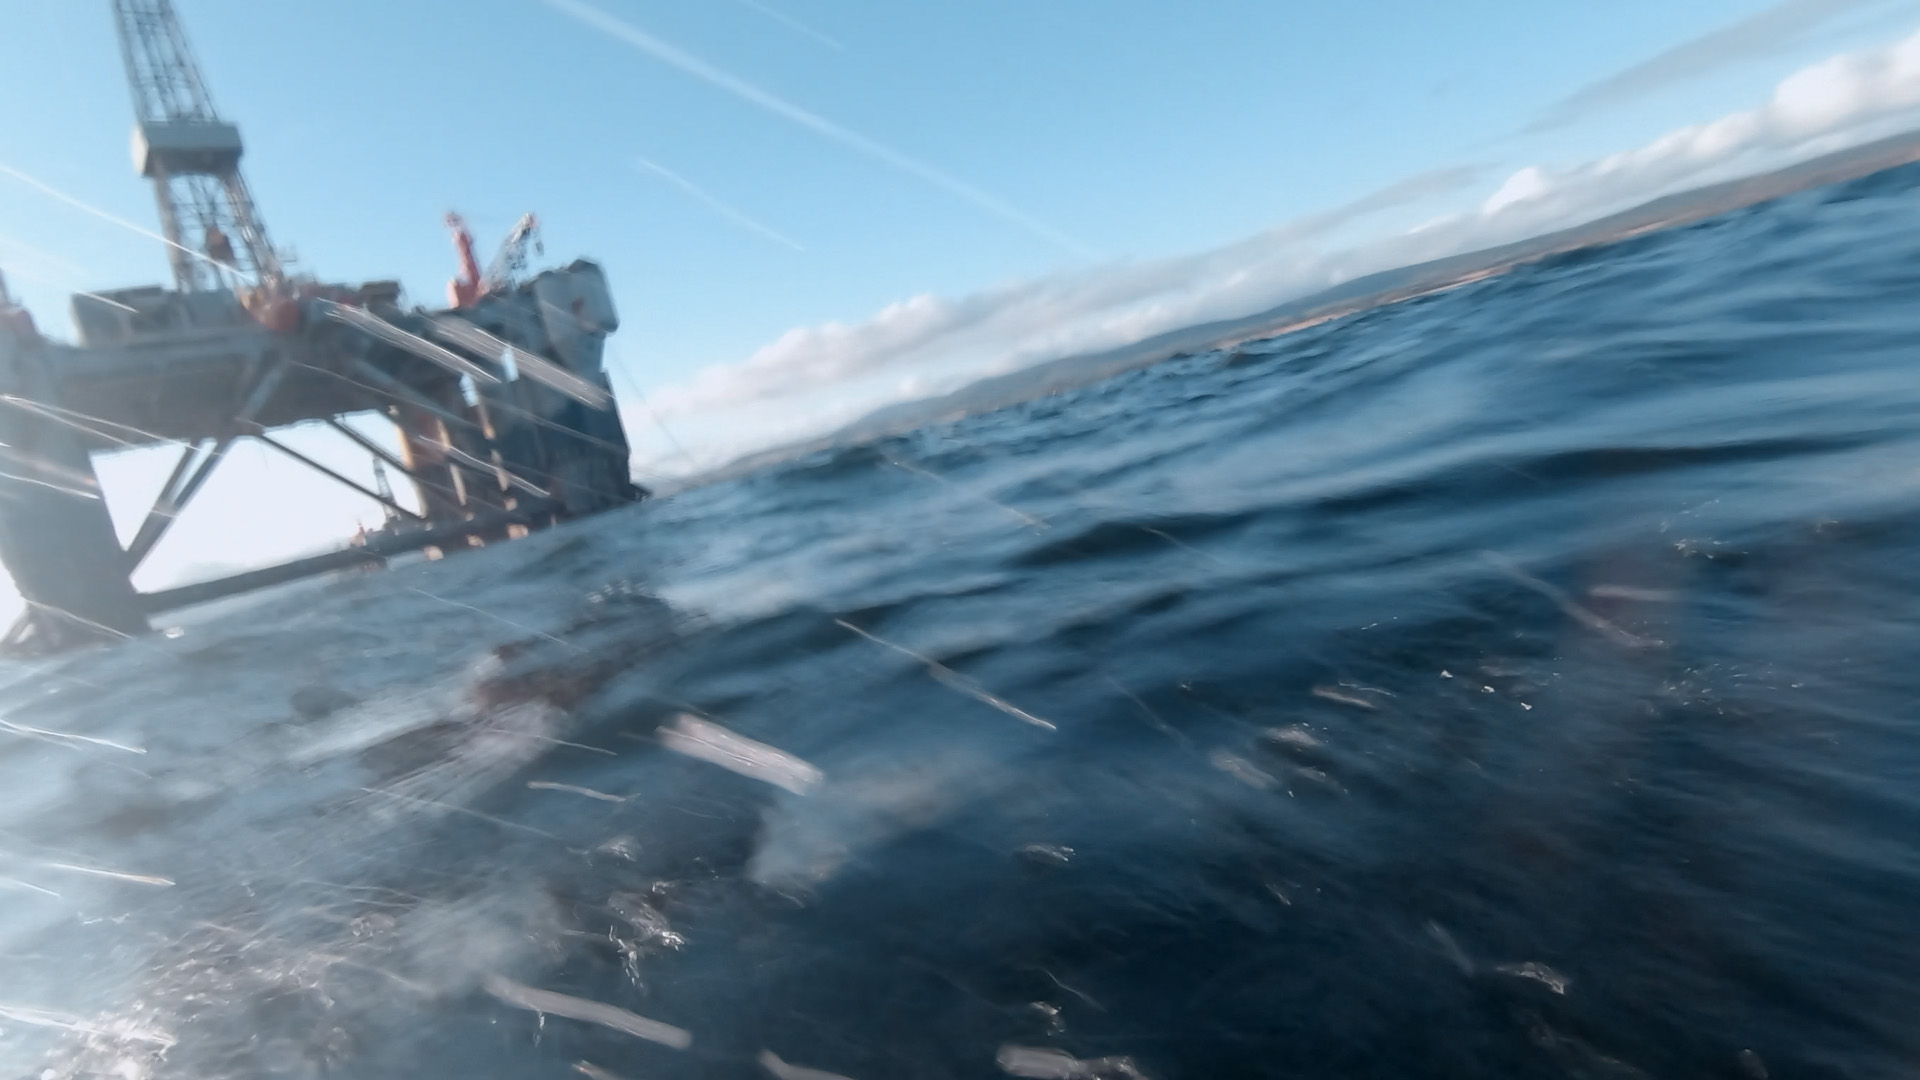 Still from The Oil Machine. An Oil Rig can be seen in the sea. The photo is slightly blurred with water splashing up on the camera lense, appearing as if the image is taken from a boat.